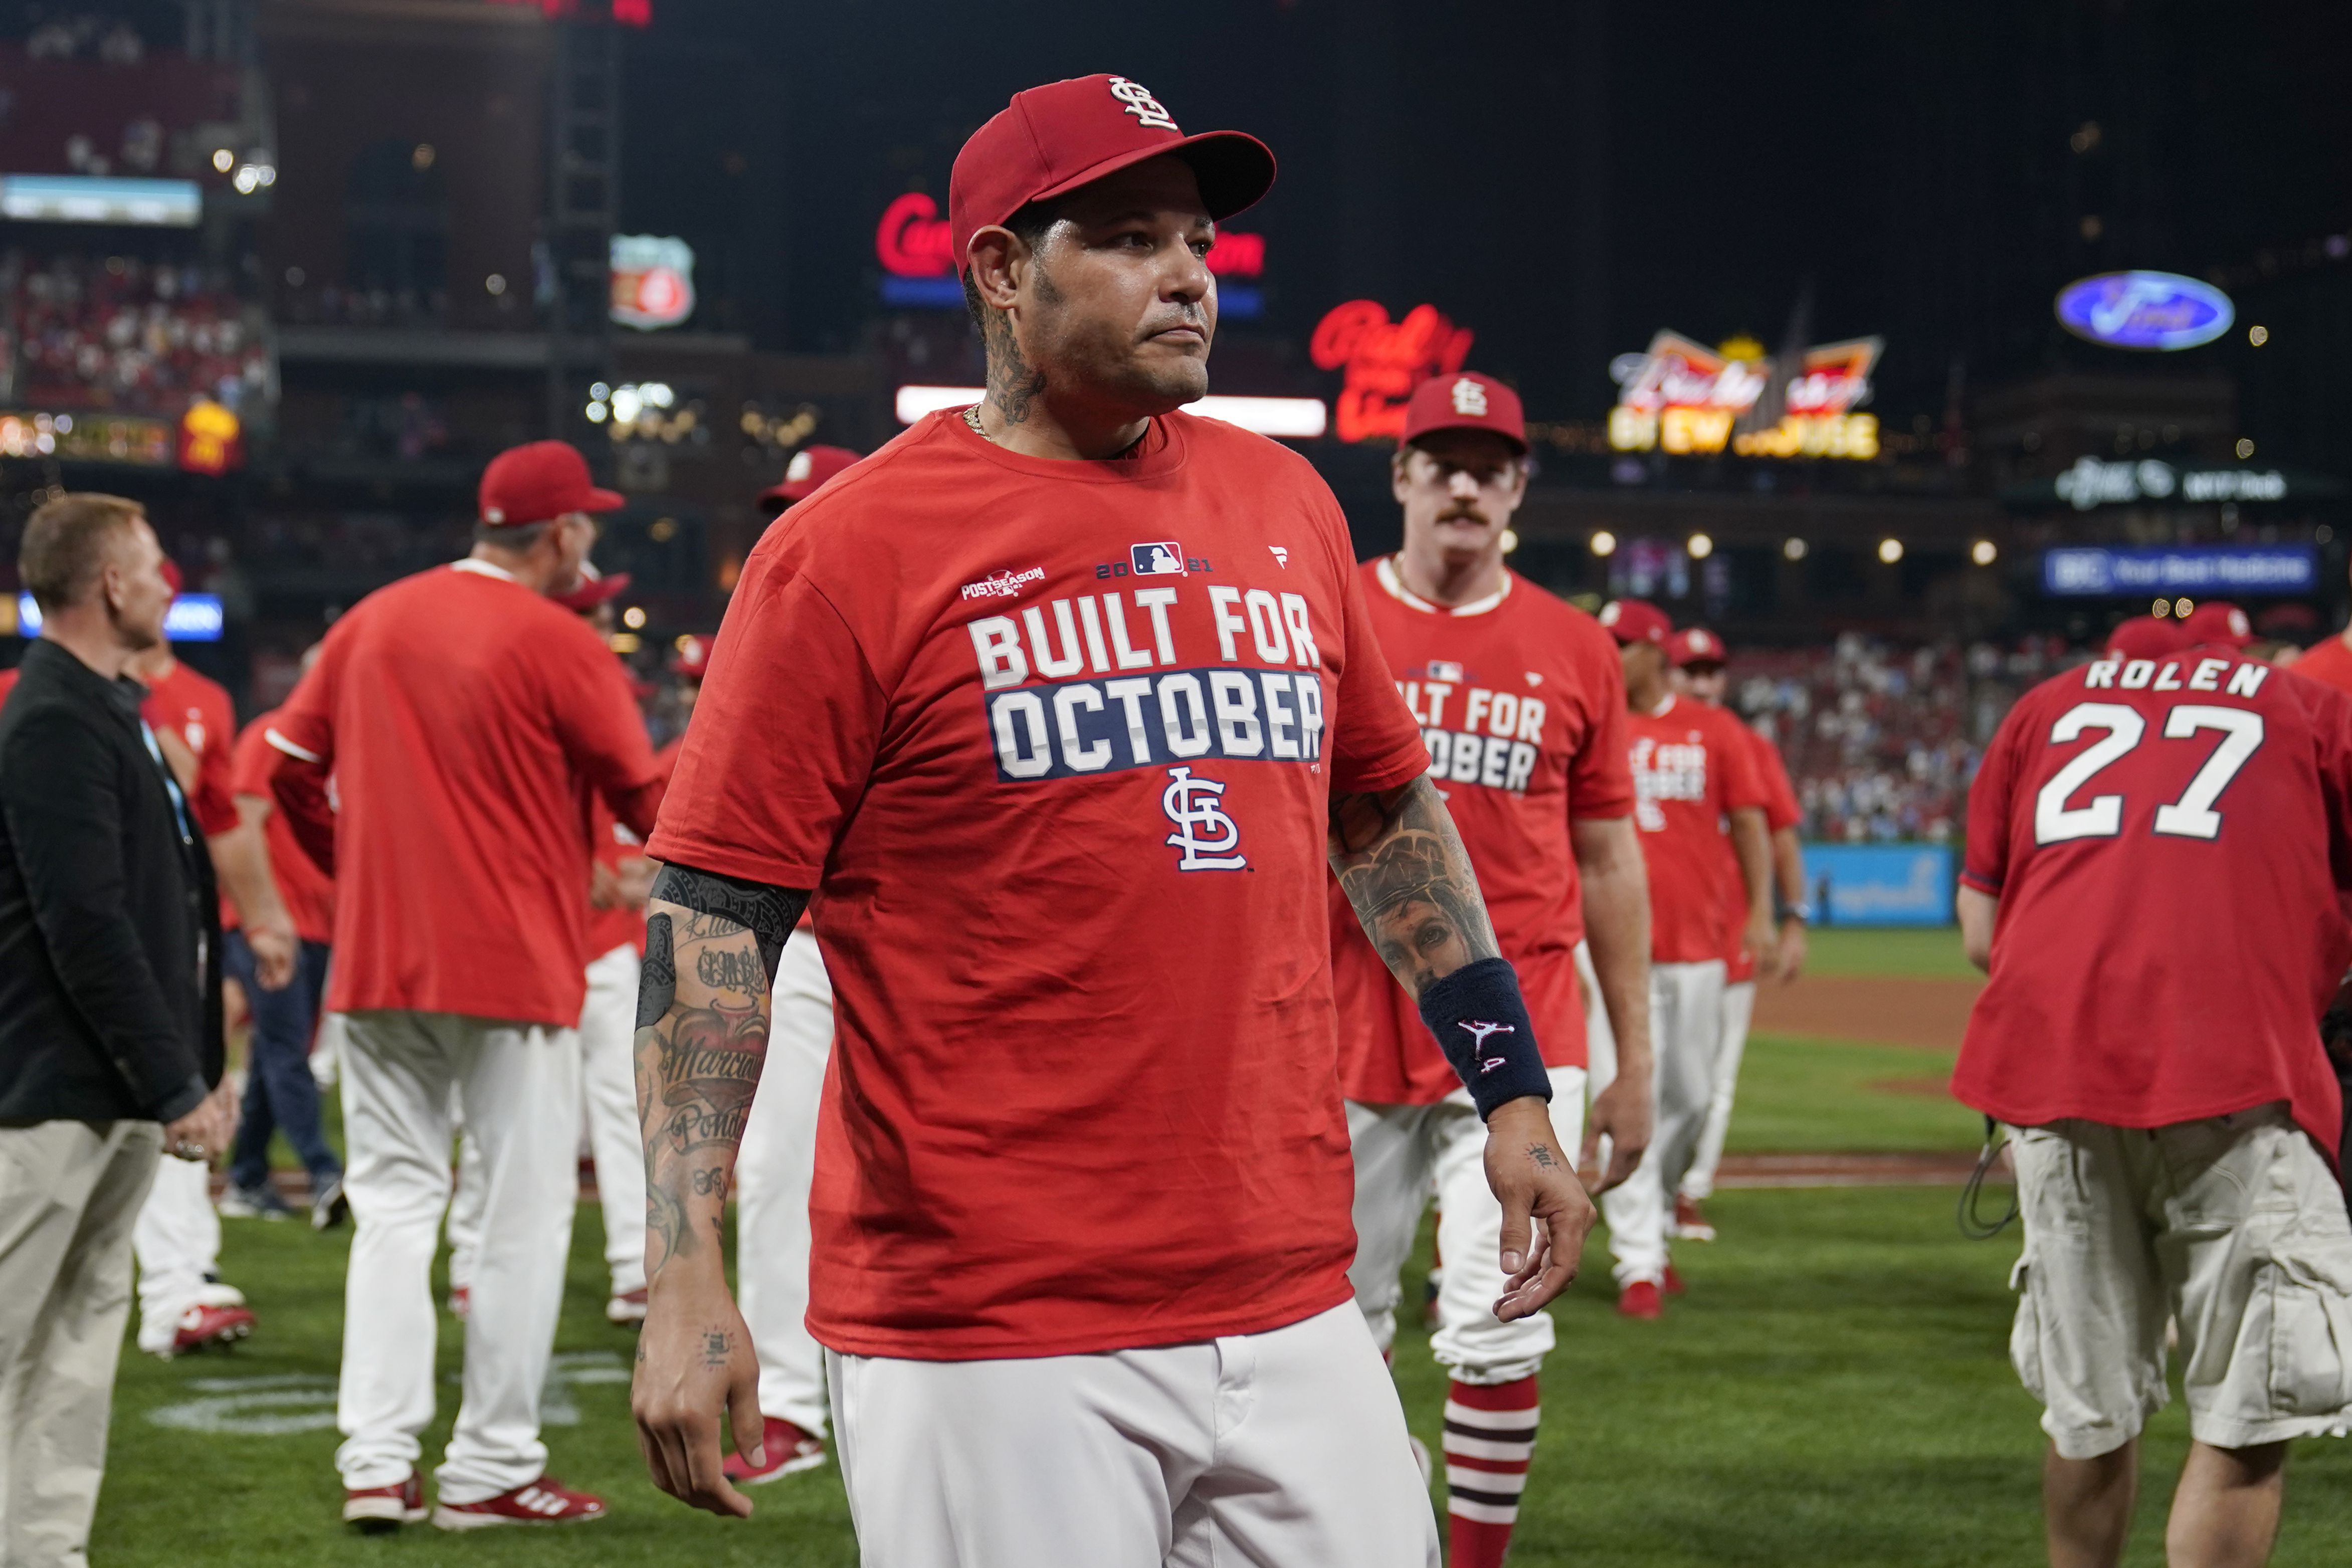 Cardinals' Molina exits game against Cubs with bruised elbow